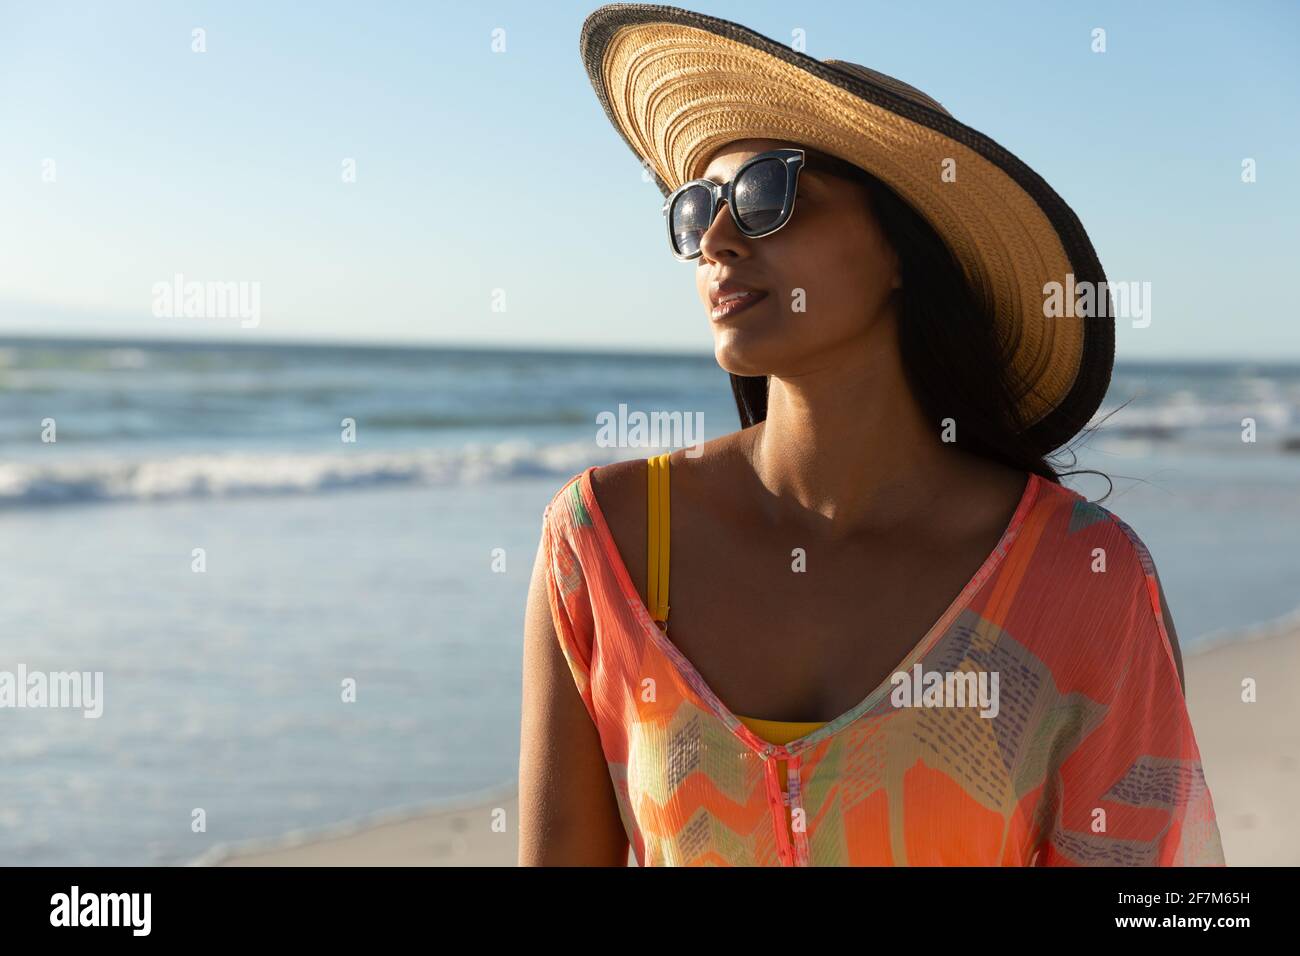 Portrait of mixed race woman on beach holiday Stock Photo